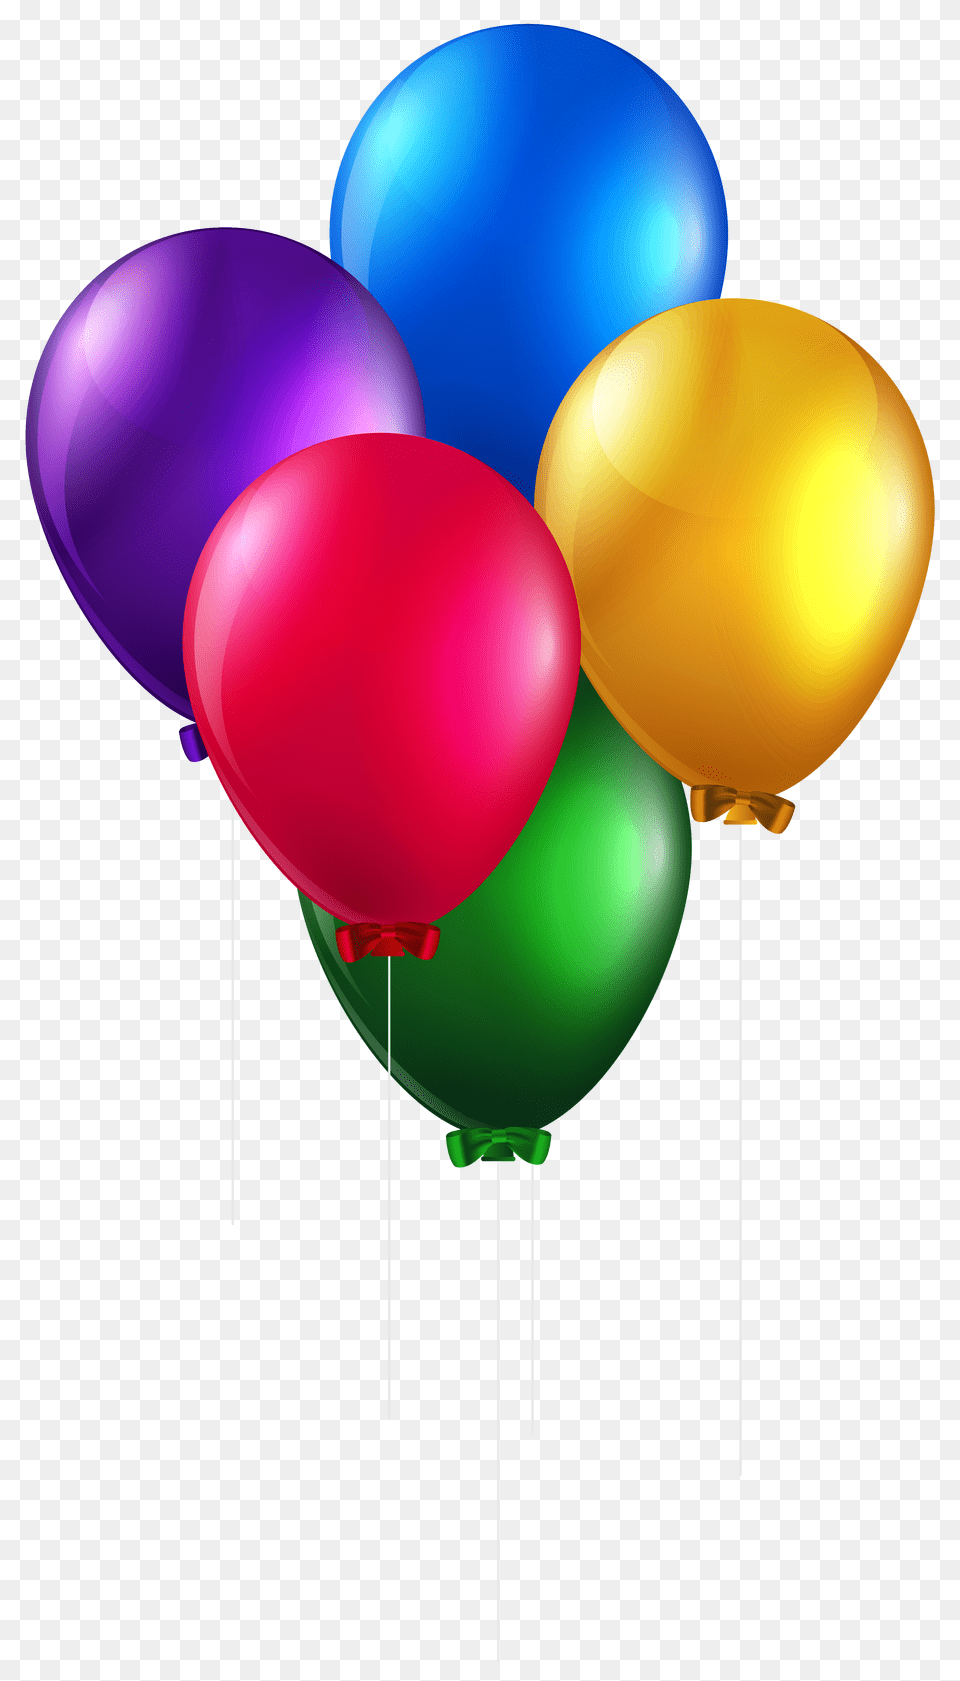 Colorful Balloons Clip Art, Balloon Png Image